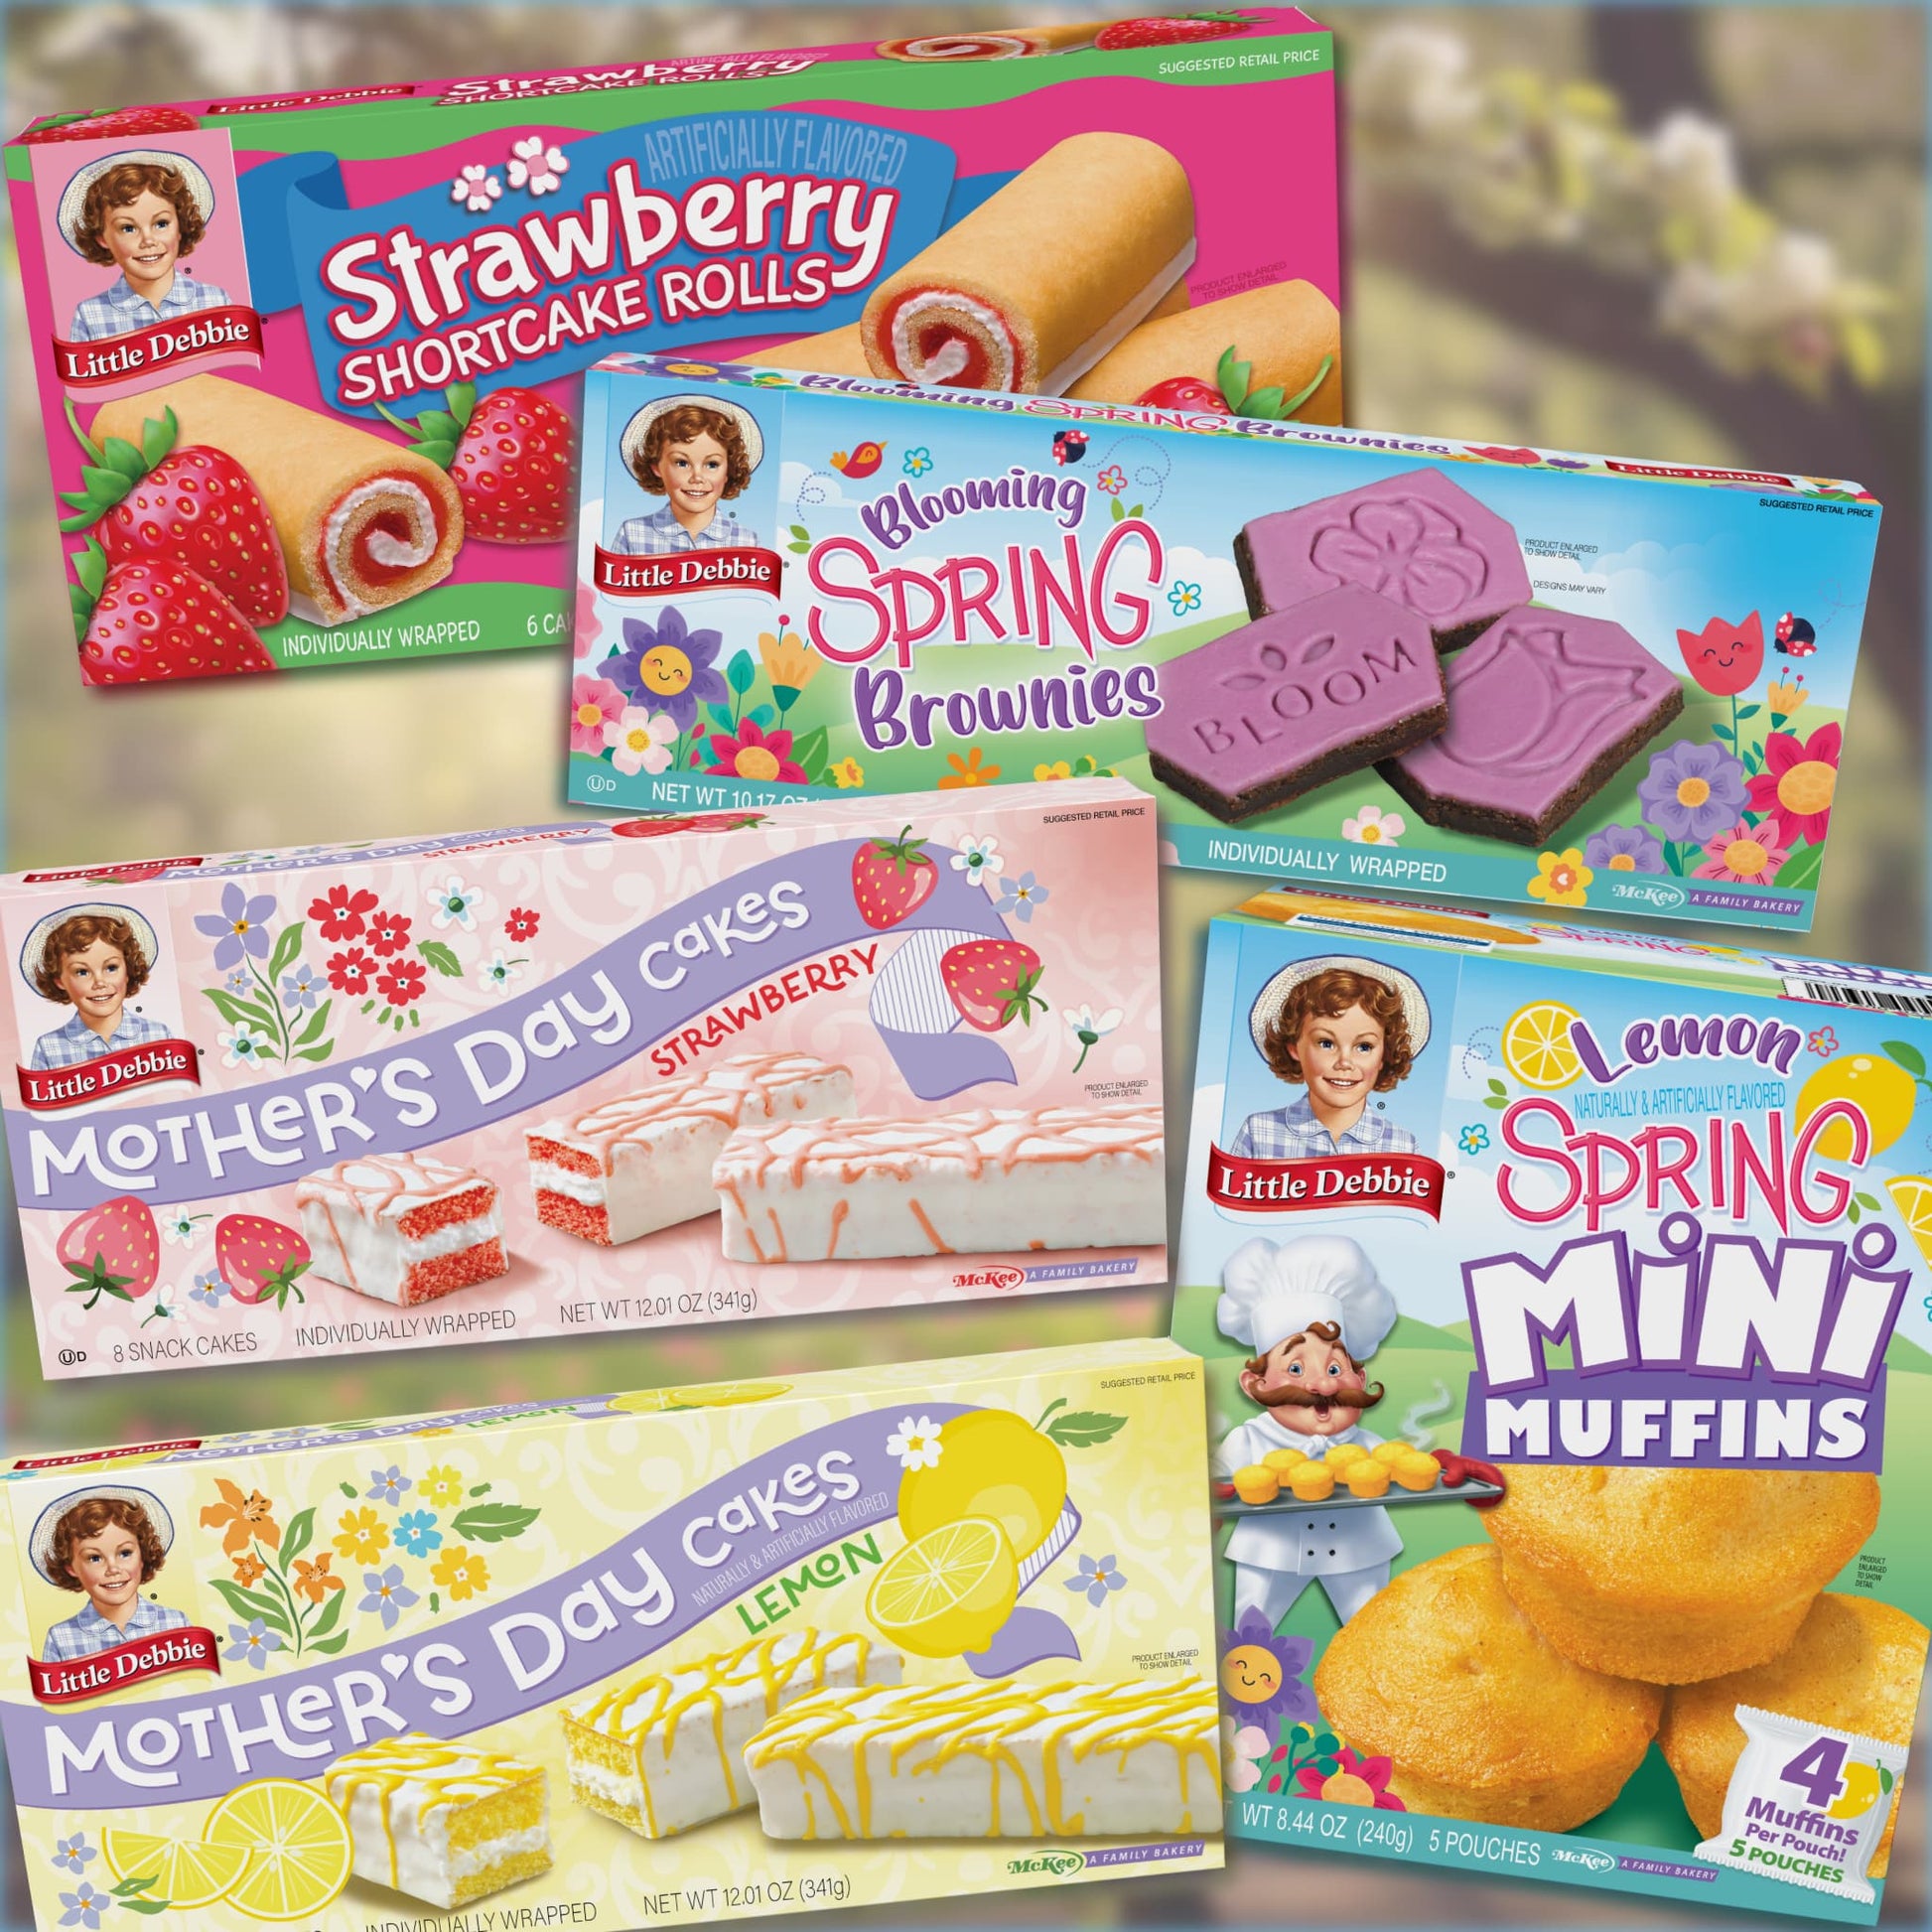 Image collage showcasing Little Debbie's Spring into Mother's Day Variety Pack. Top left: Strawberry Shortcake Rolls packaging with strawberry imagery. Bottom right: Lemon Spring Mini Muffins box displaying yellow muffins. Middle: Blooming Spring Brownies box featuring pink, flower-shaped brownies with 'BLOOM' text. Bottom left: Mother's Day Cakes in strawberry flavor, shown with strawberry decorations. Bottom center: Mother's Day Cakes in lemon flavor, depicted with lemon slices and icing.